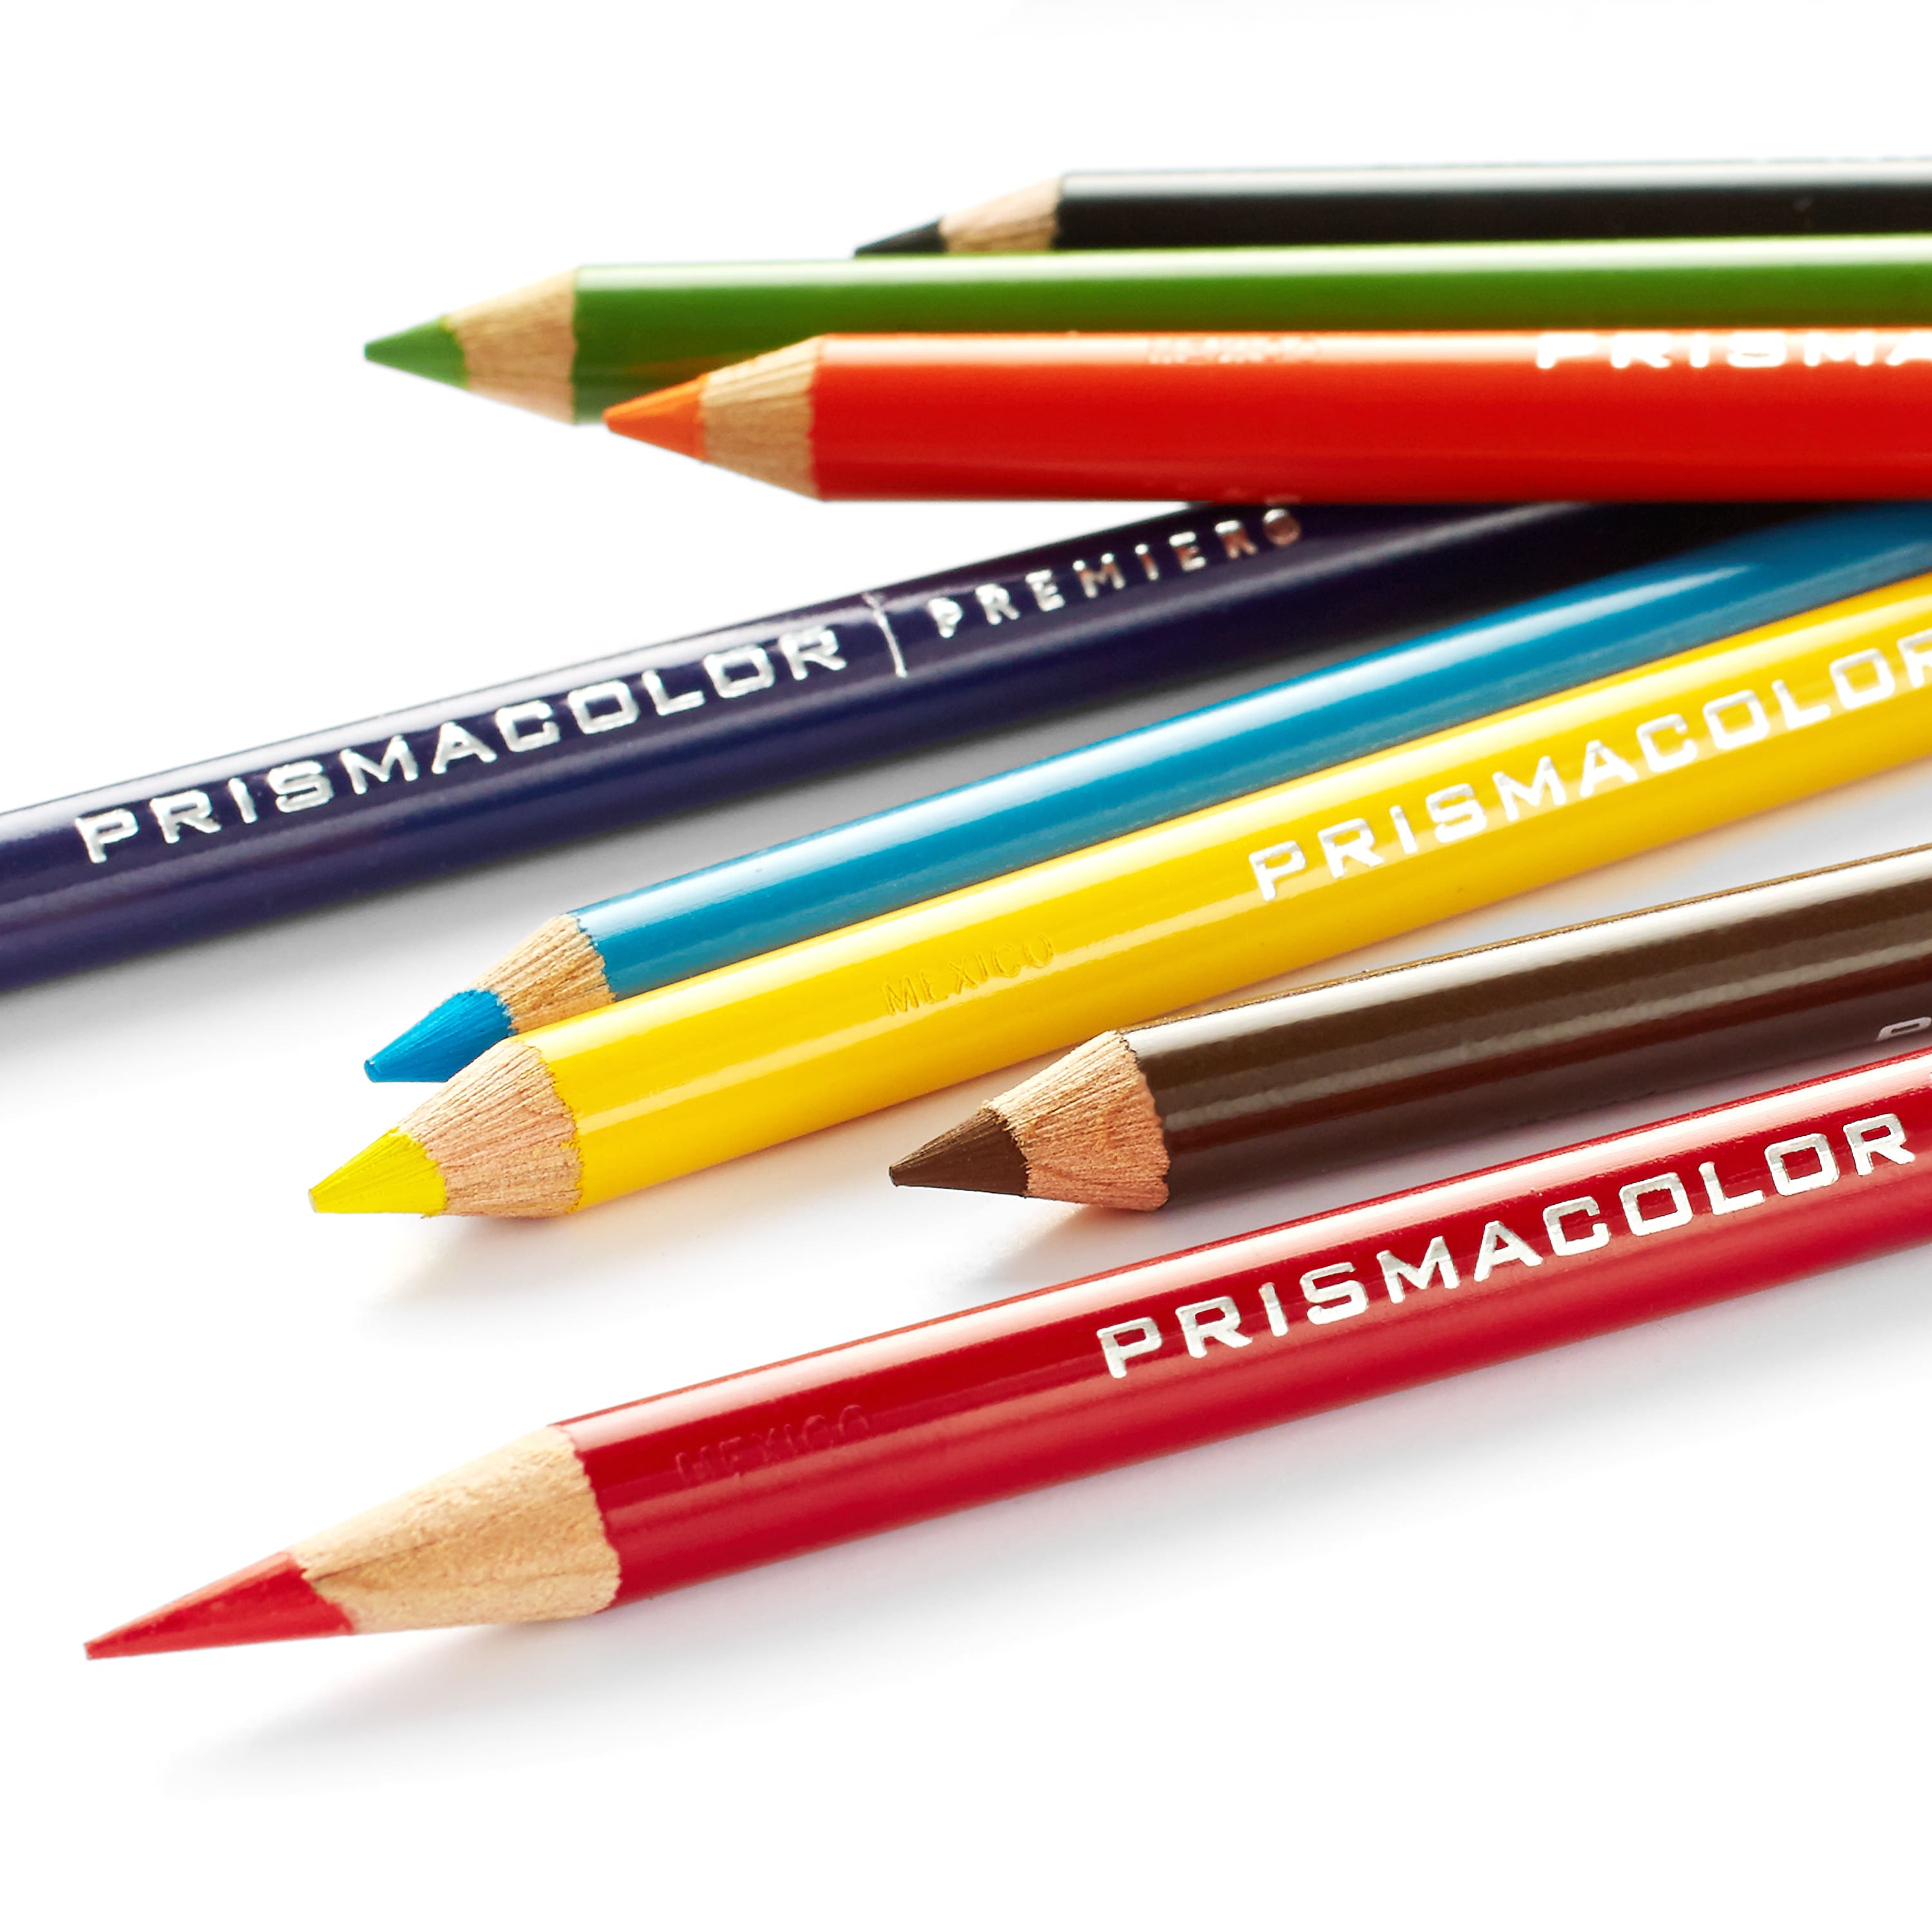 Spring is in the air on colored pencils Set of 6! 